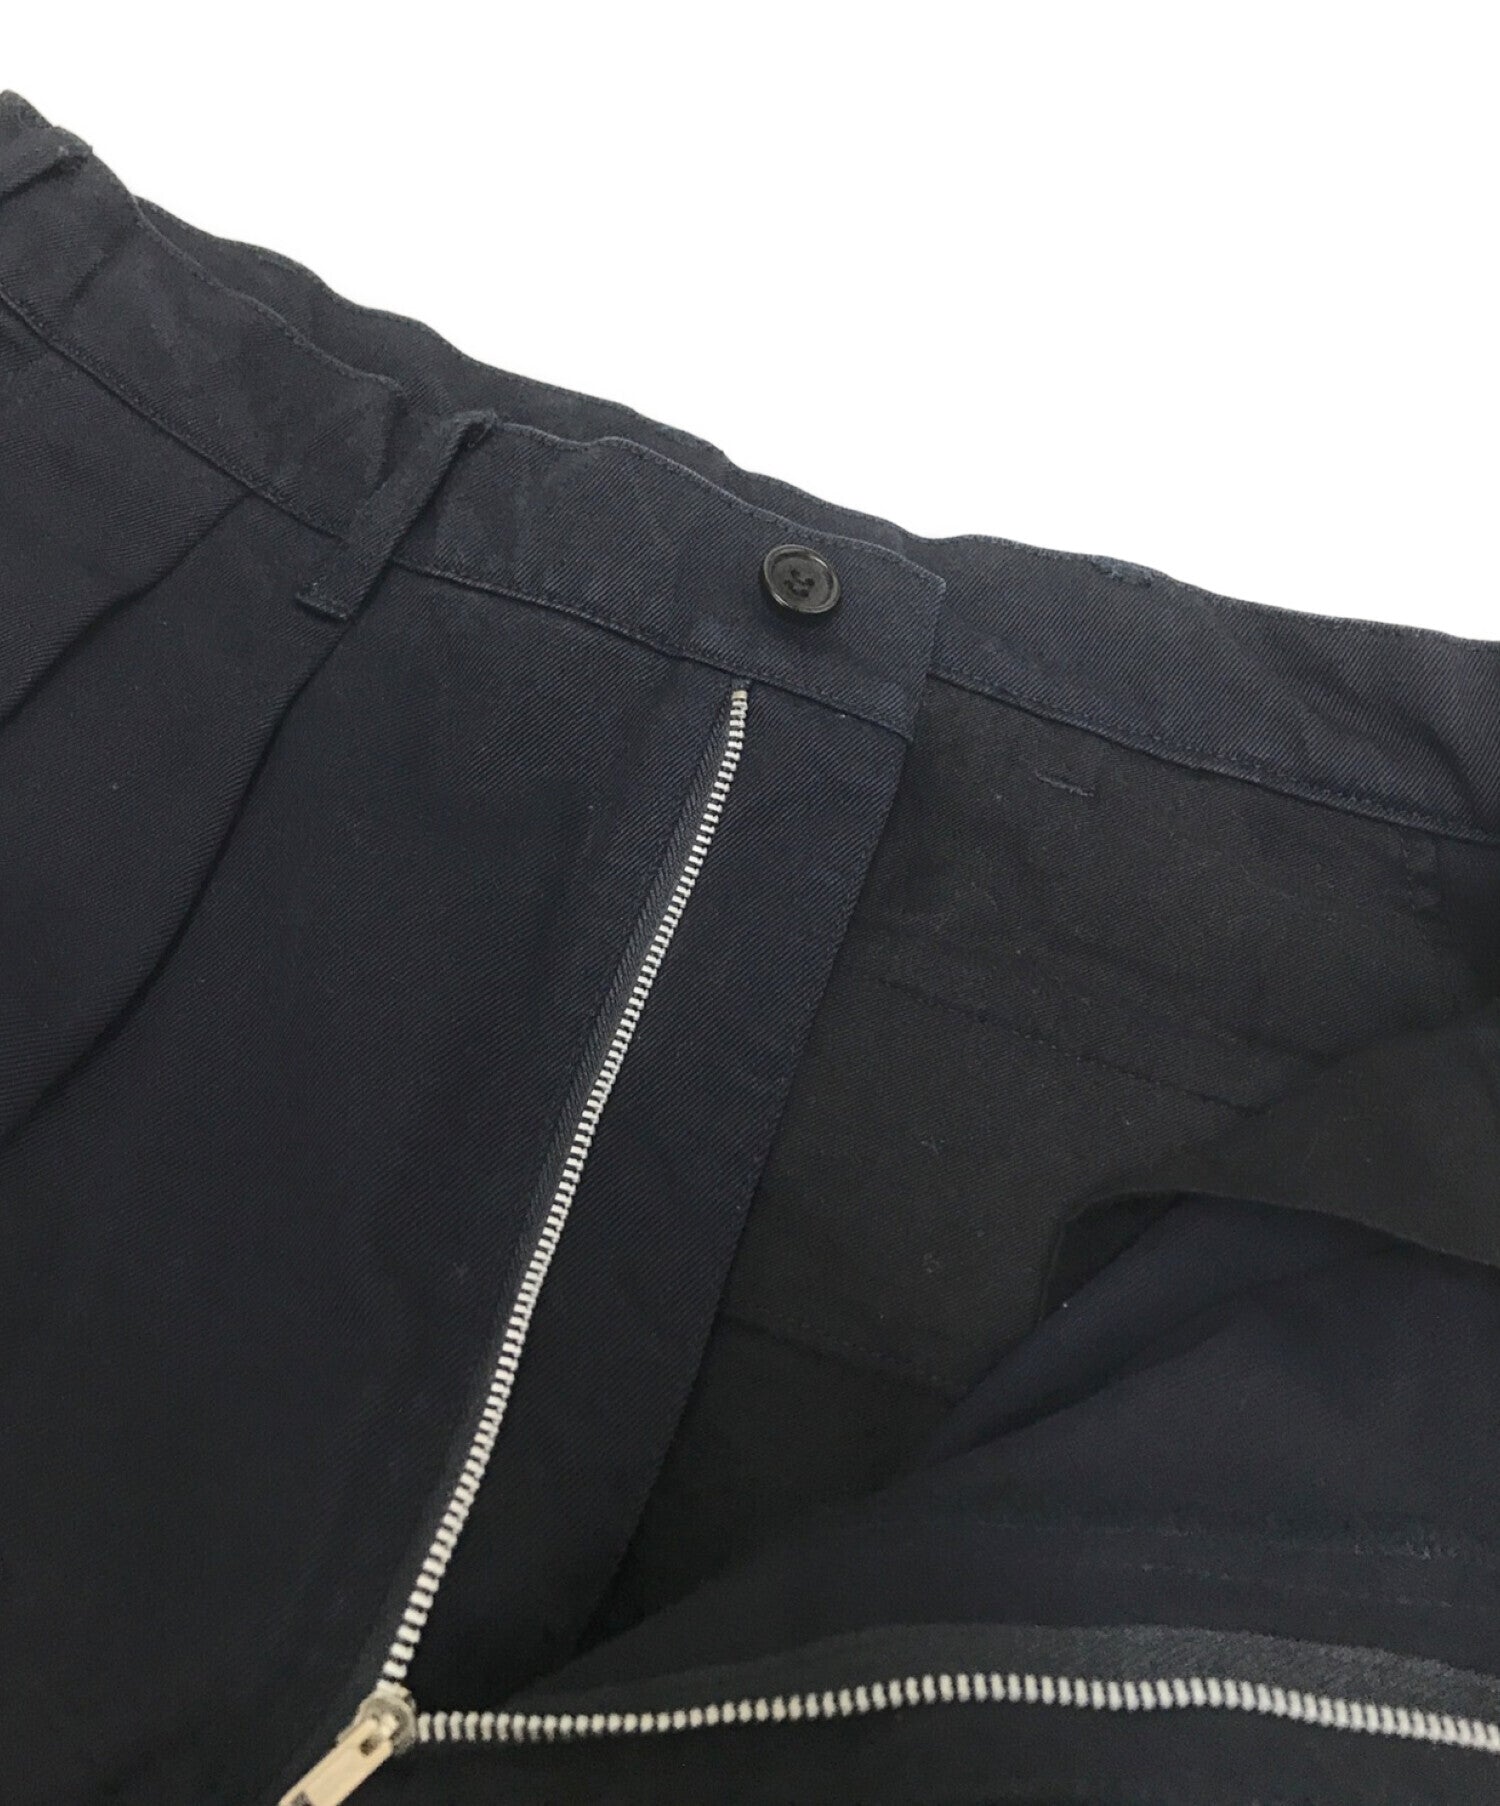 The Lock on the Pants.Dark Trousers with an Open Fly Stock Photo - Image of  connection, object: 193869248